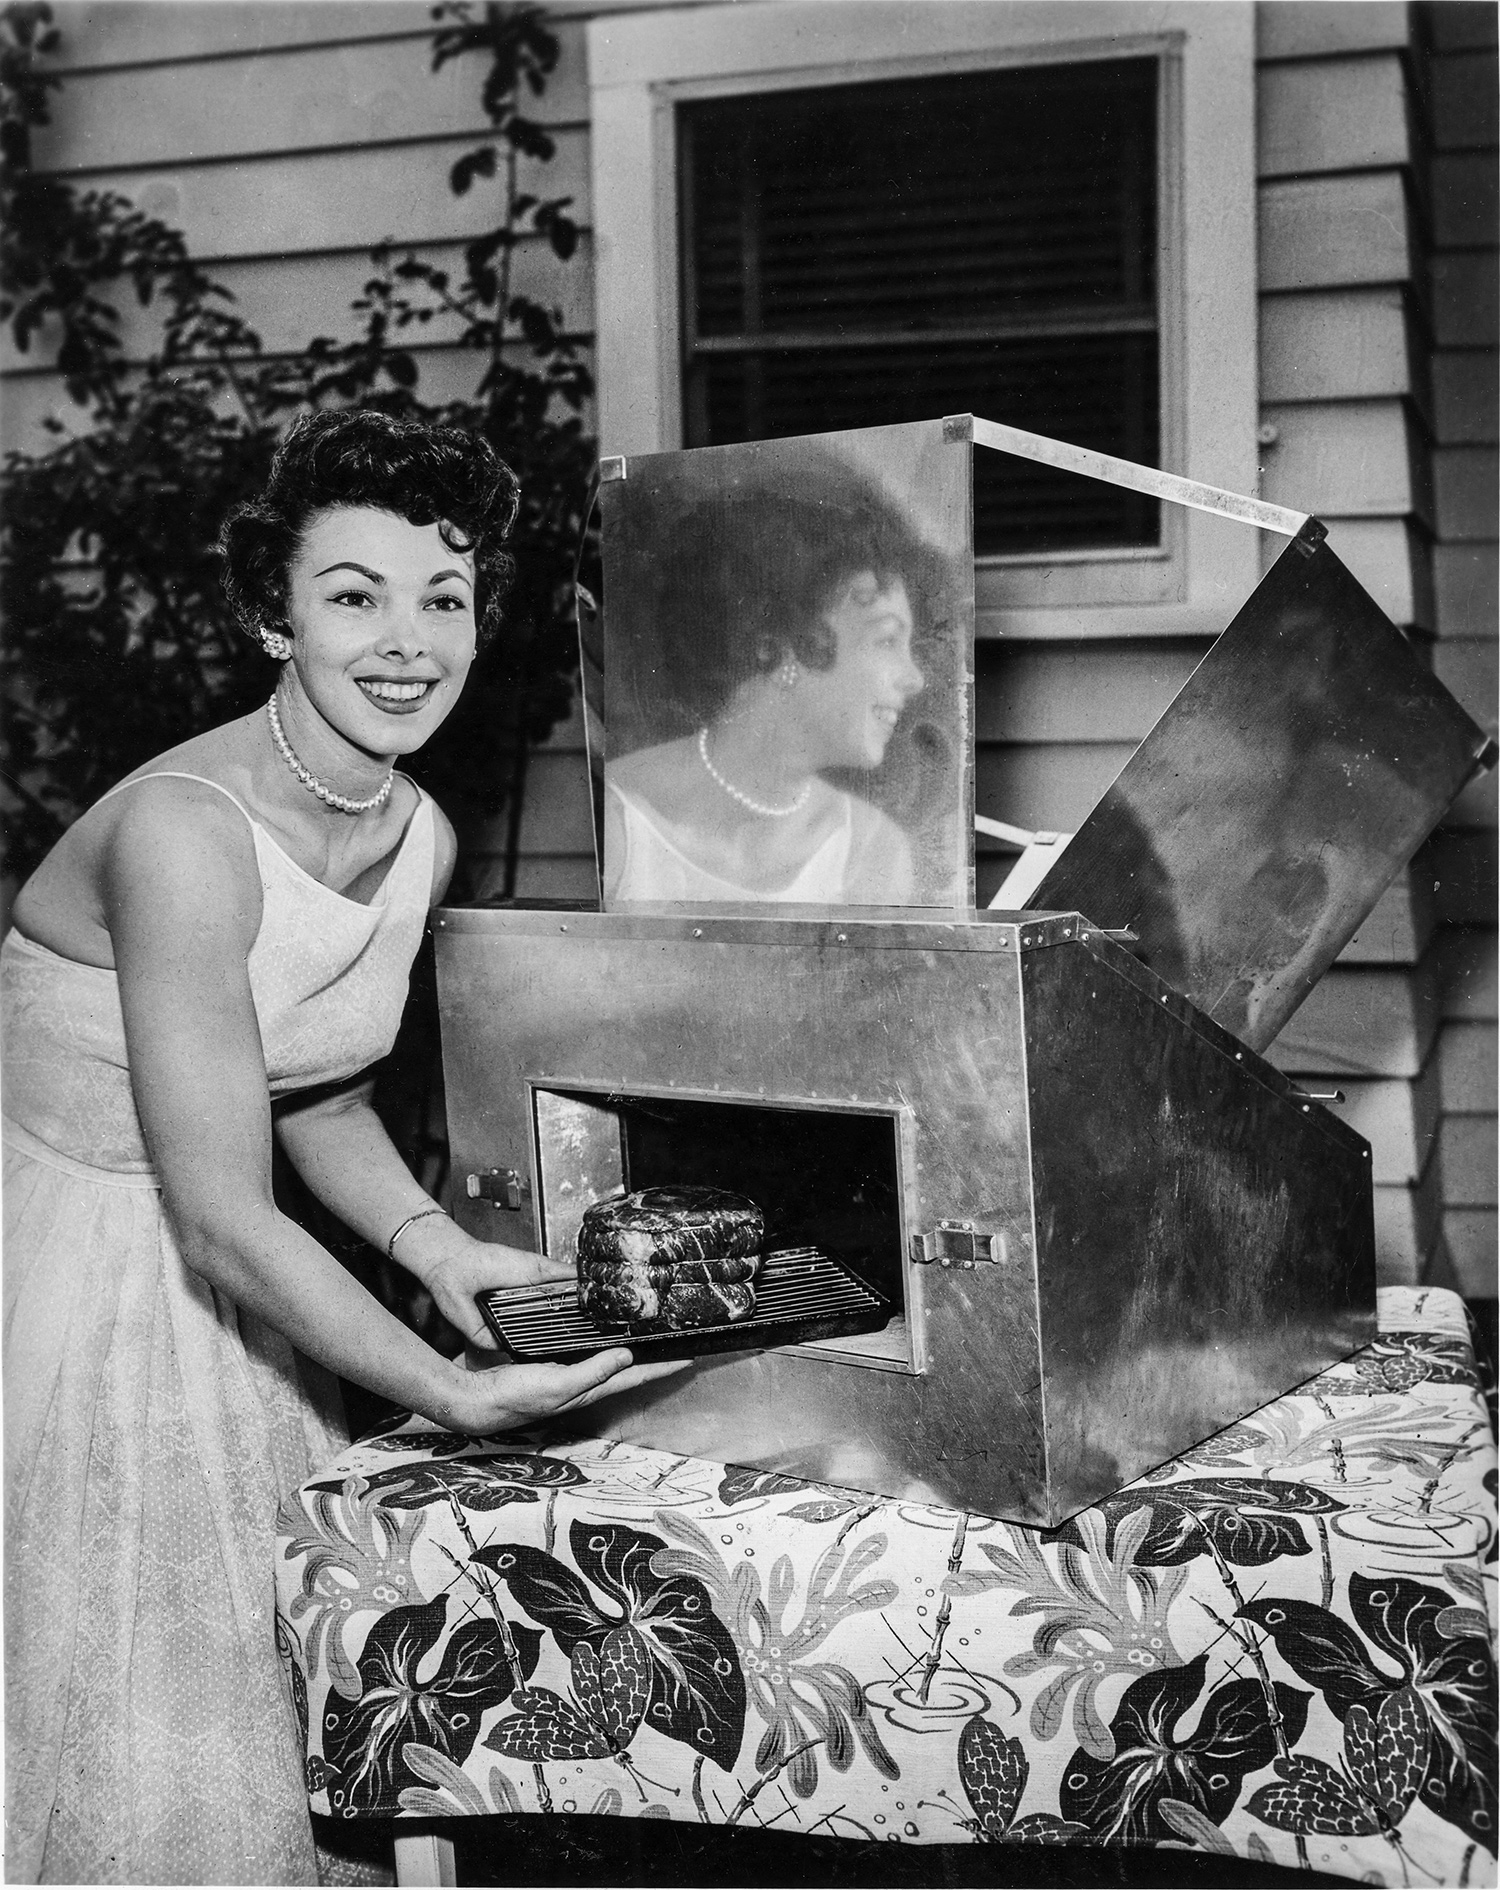 A black-and-white photo shows a mid-20th century woman smiling at the camera as she pulls a meal out a solar oven.